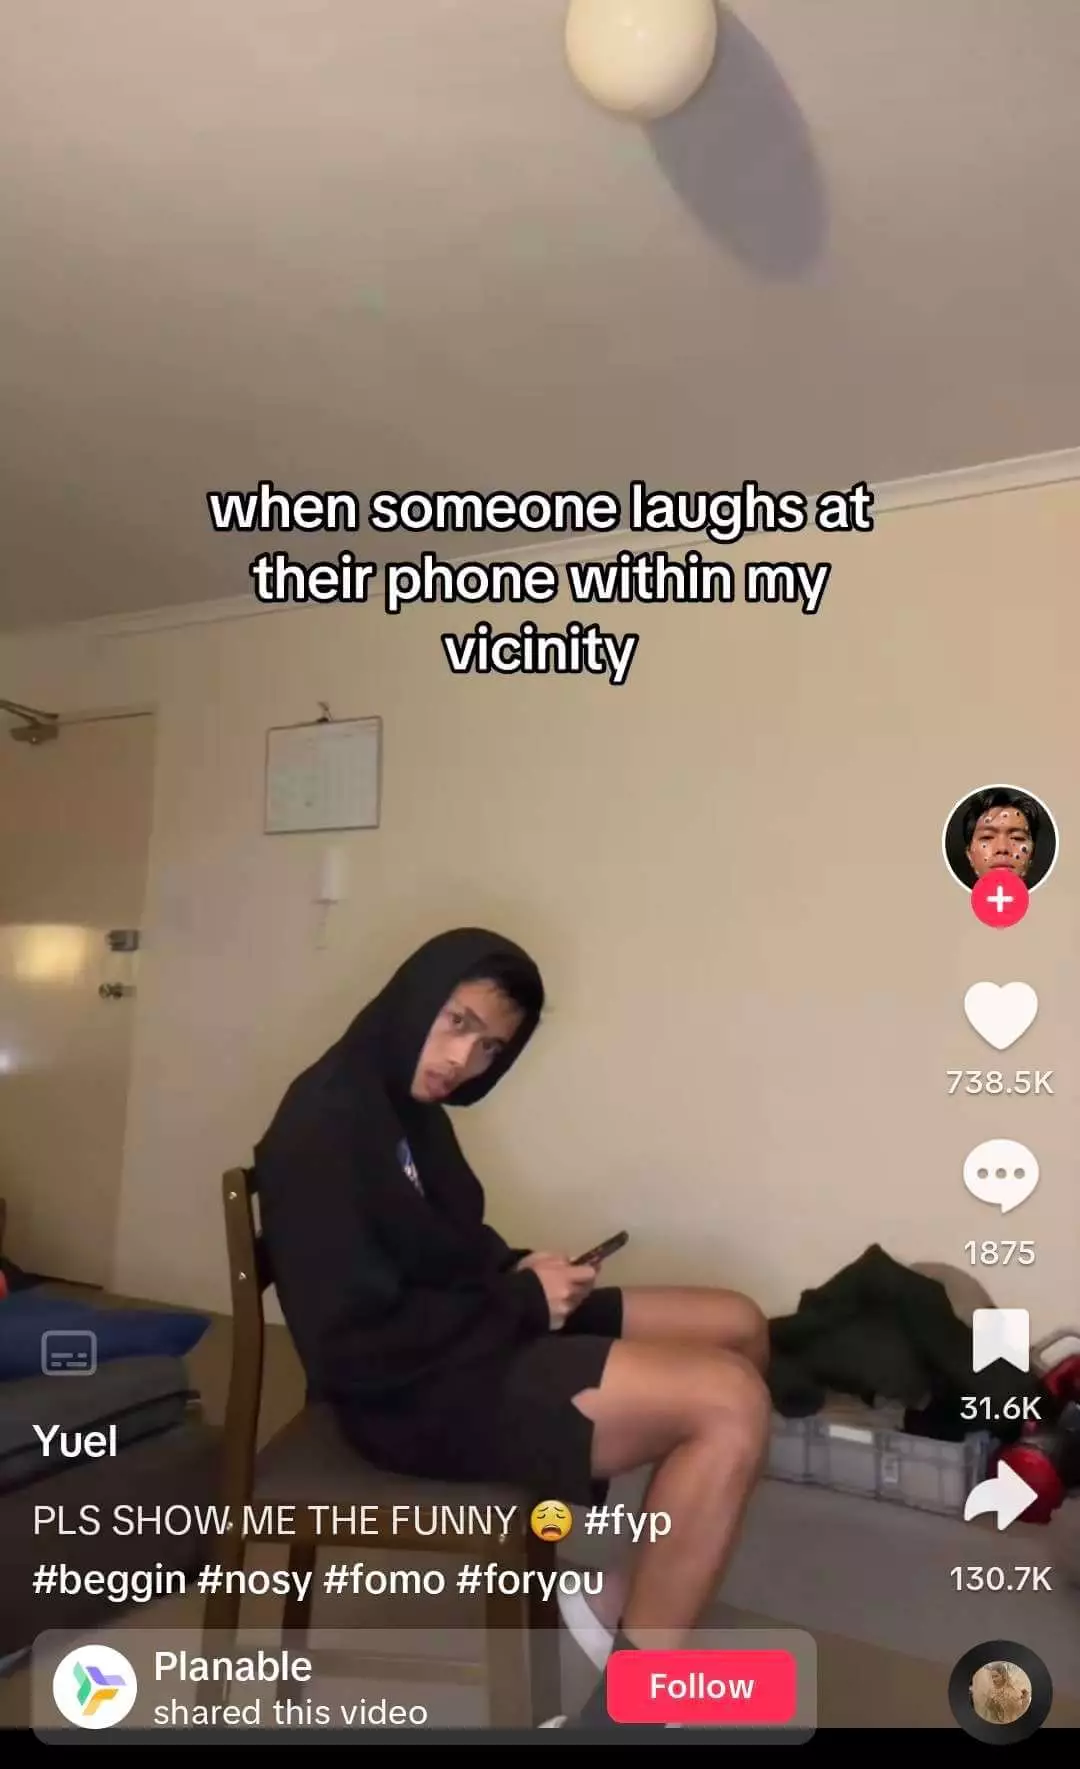 Young person in a hoodie sitting on a chair, giving a curious look while holding a smartphone, humorously depicted in a social media post about overhearing laughter.